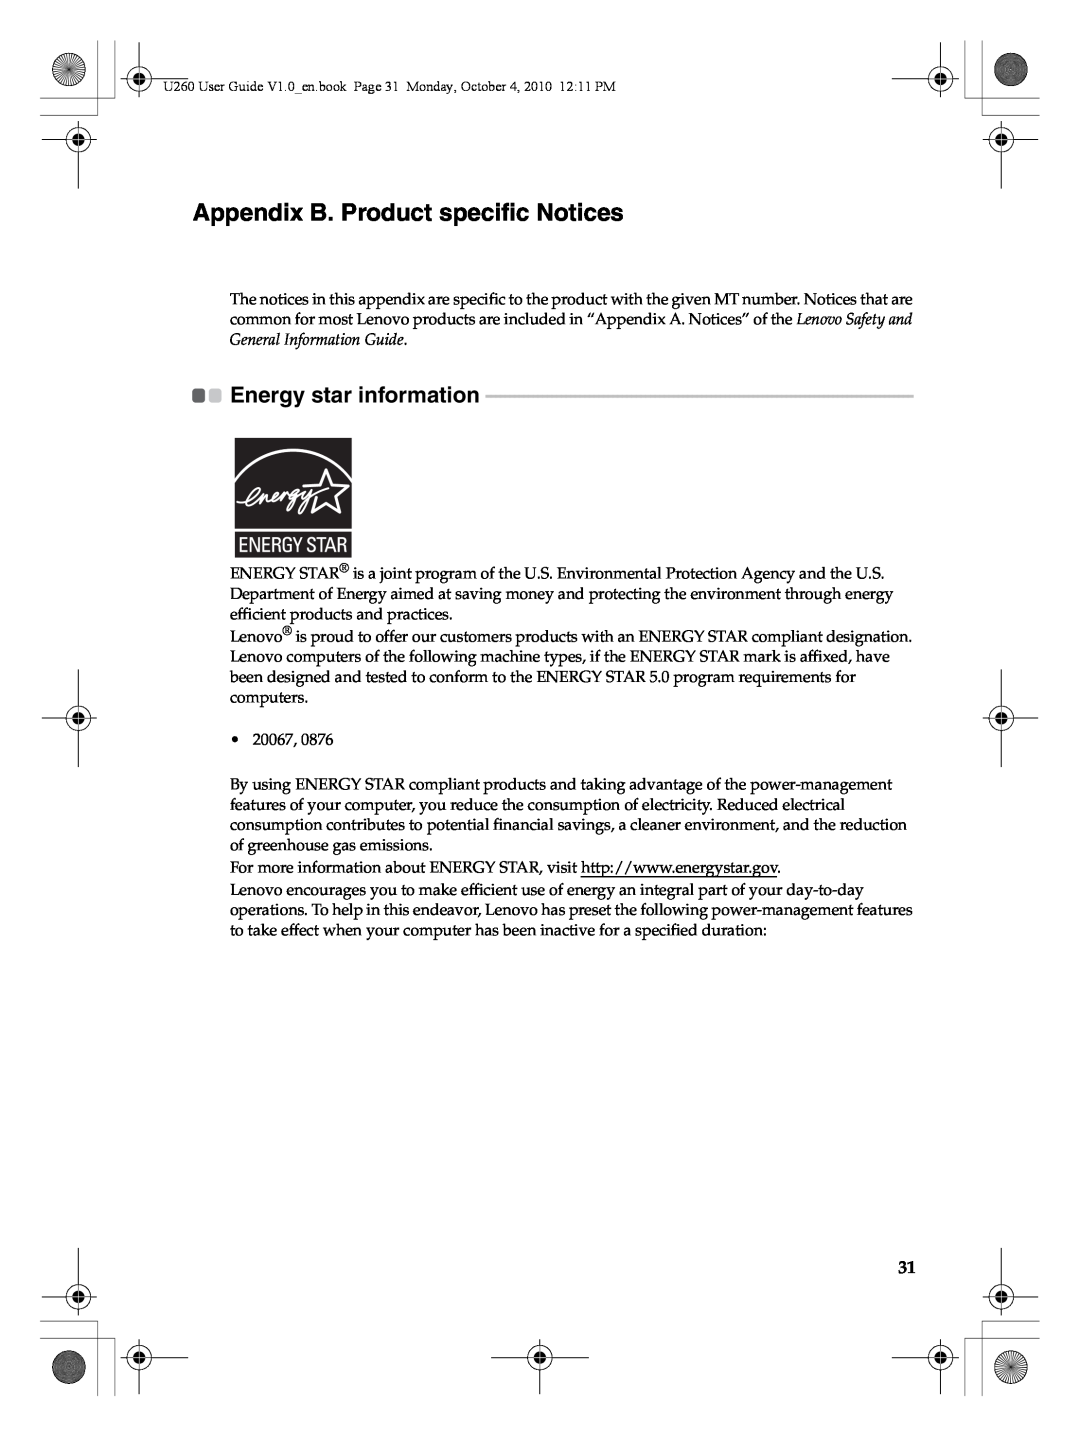 Lenovo U260 manual Appendix B. Product specific Notices, Energy star information 